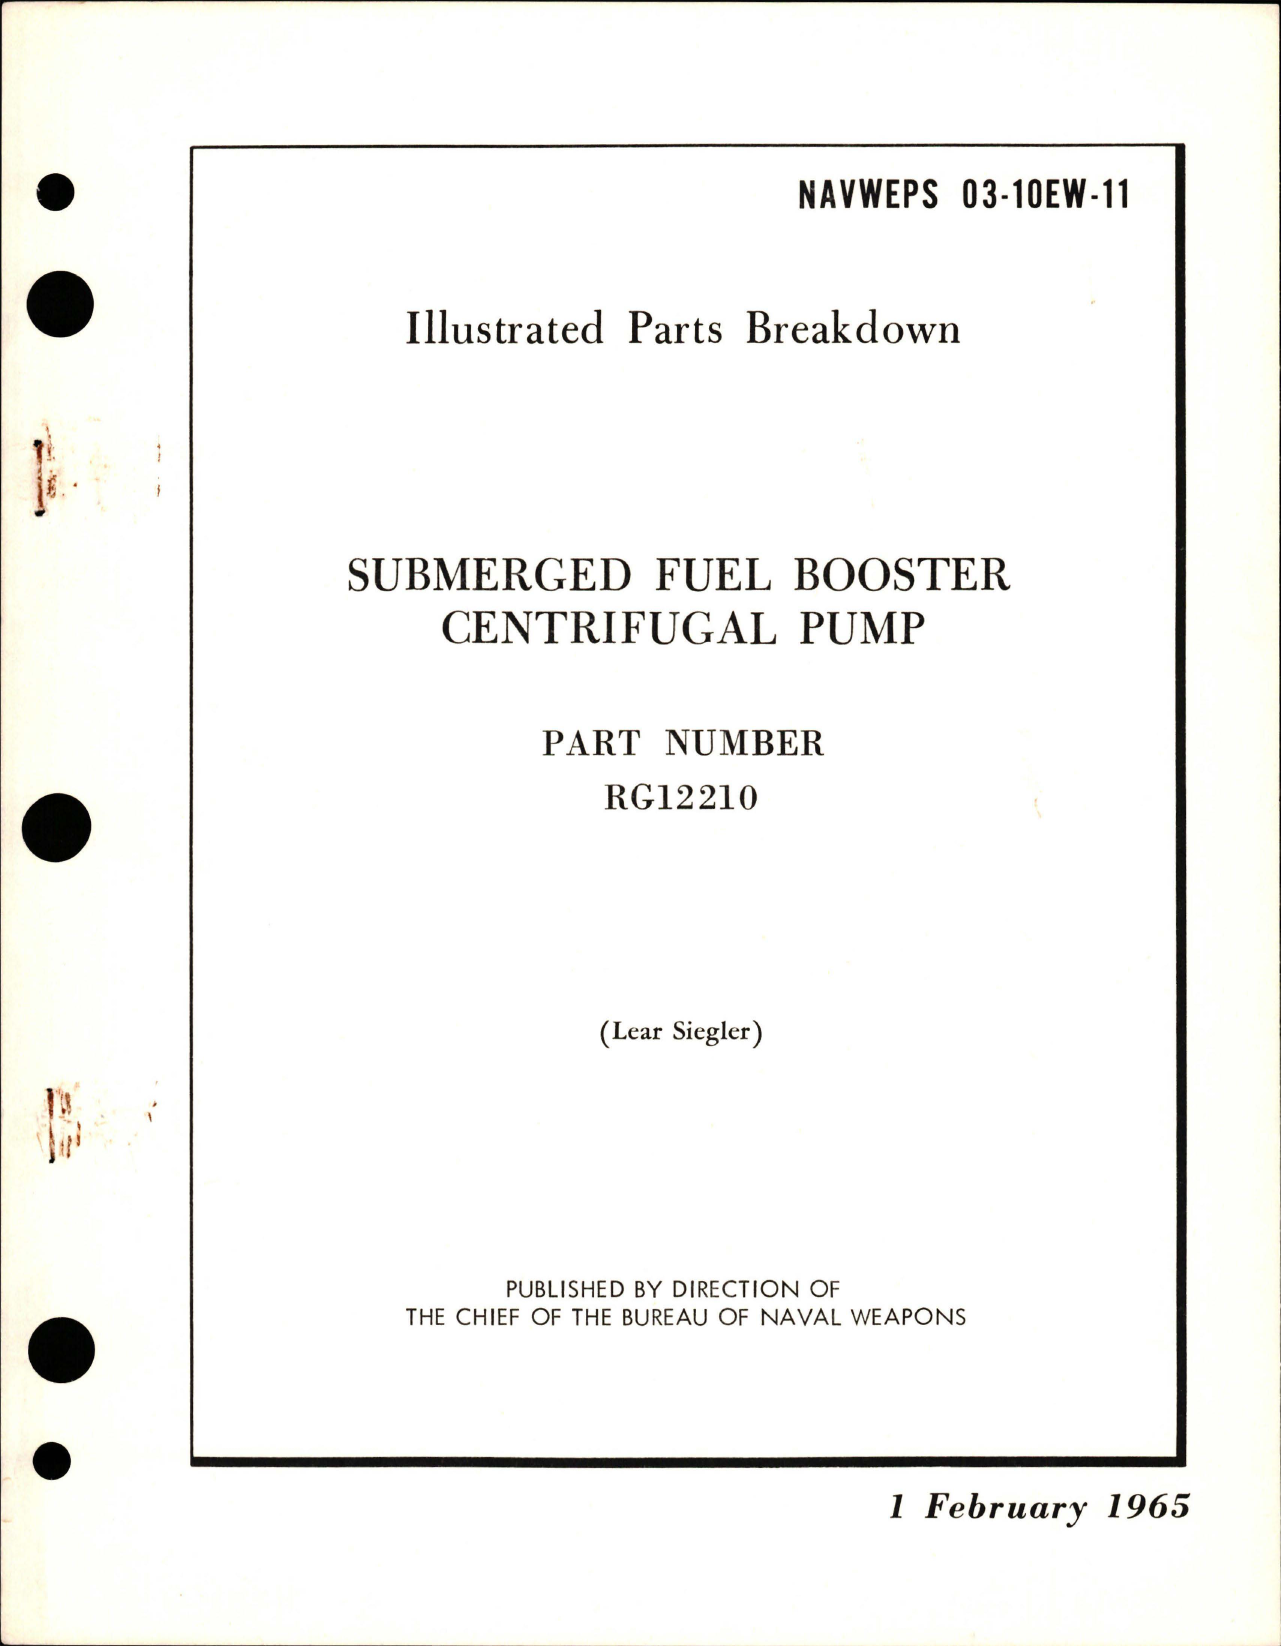 Sample page 1 from AirCorps Library document: Illustrated Parts Breakdown for Submerged Fuel Booster Centrifugal Pump - Part RG12210